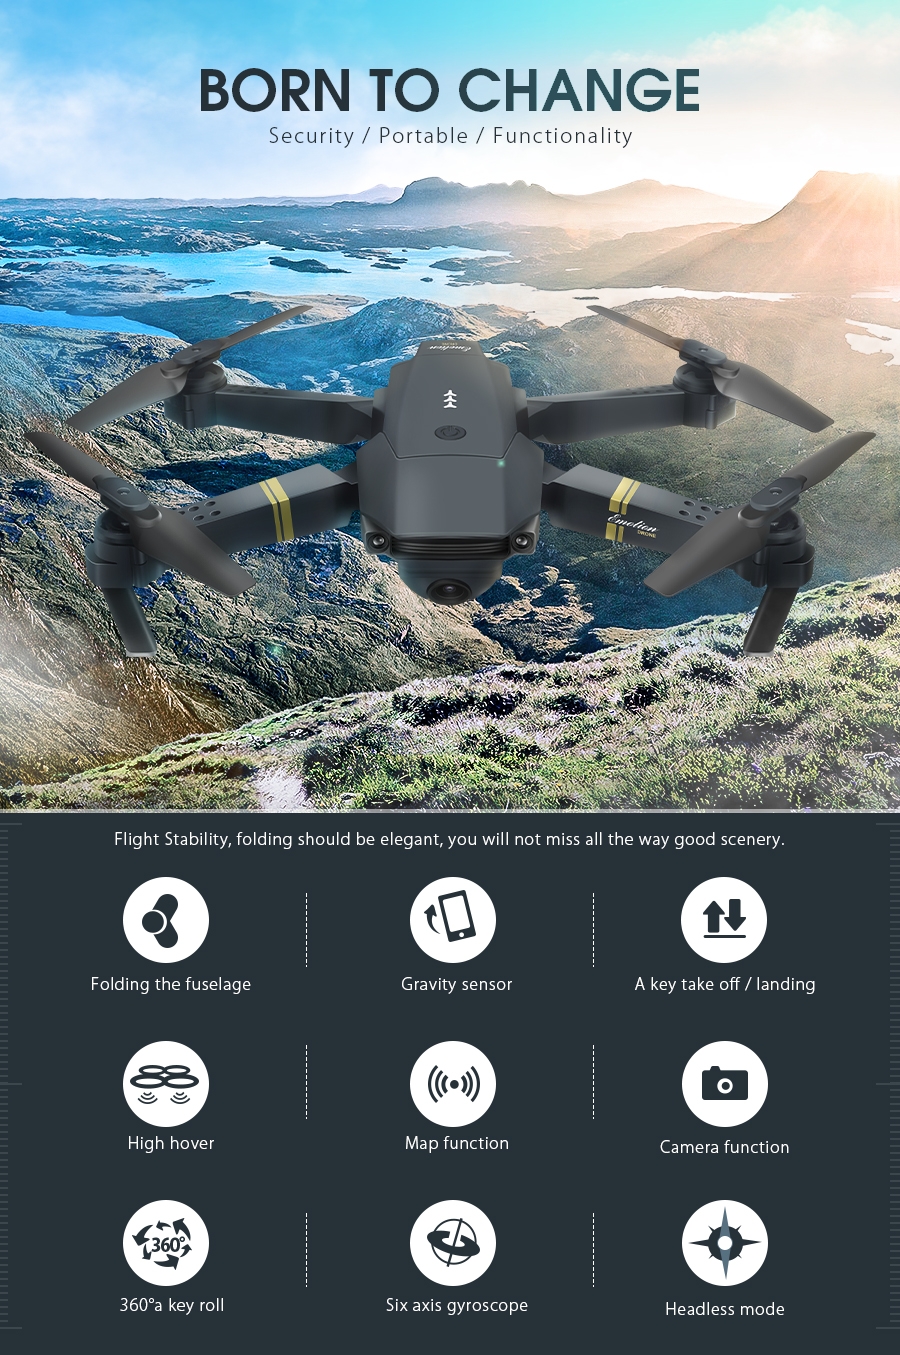 Eachine E58 WIFI FPV With 720P/1080P HD Wide Angle Camera High Hold Mode Foldable RC Drone Quadcopter RTF